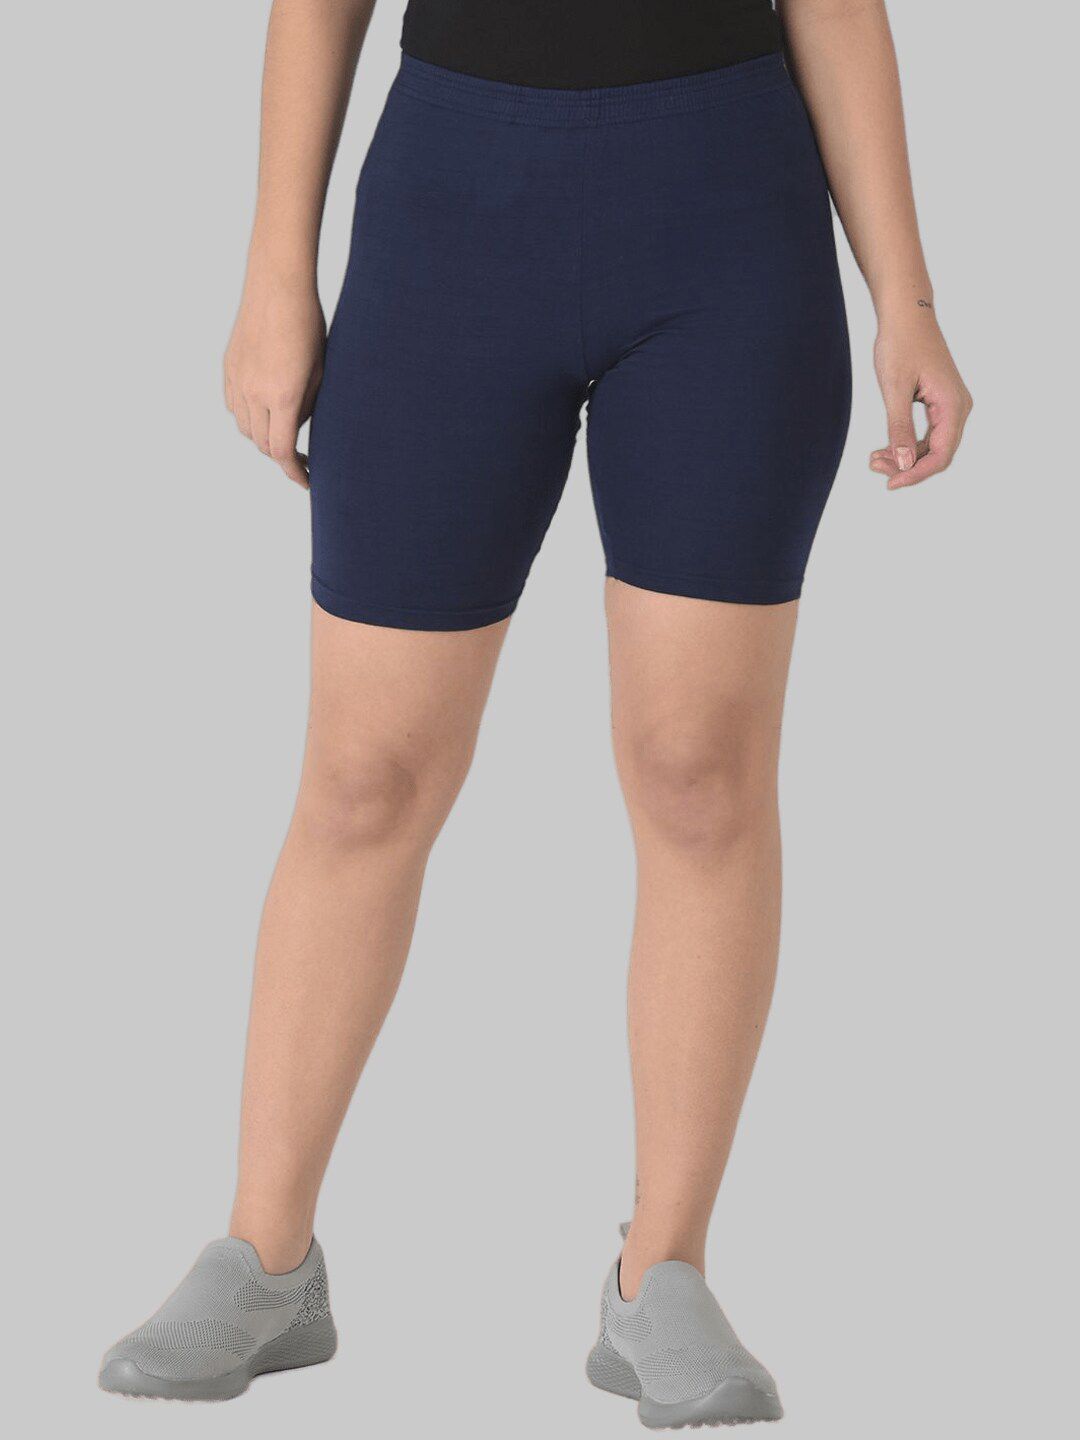 Dollar Missy Women Navy Blue Skinny Fit Cycling Sports Shorts Price in India